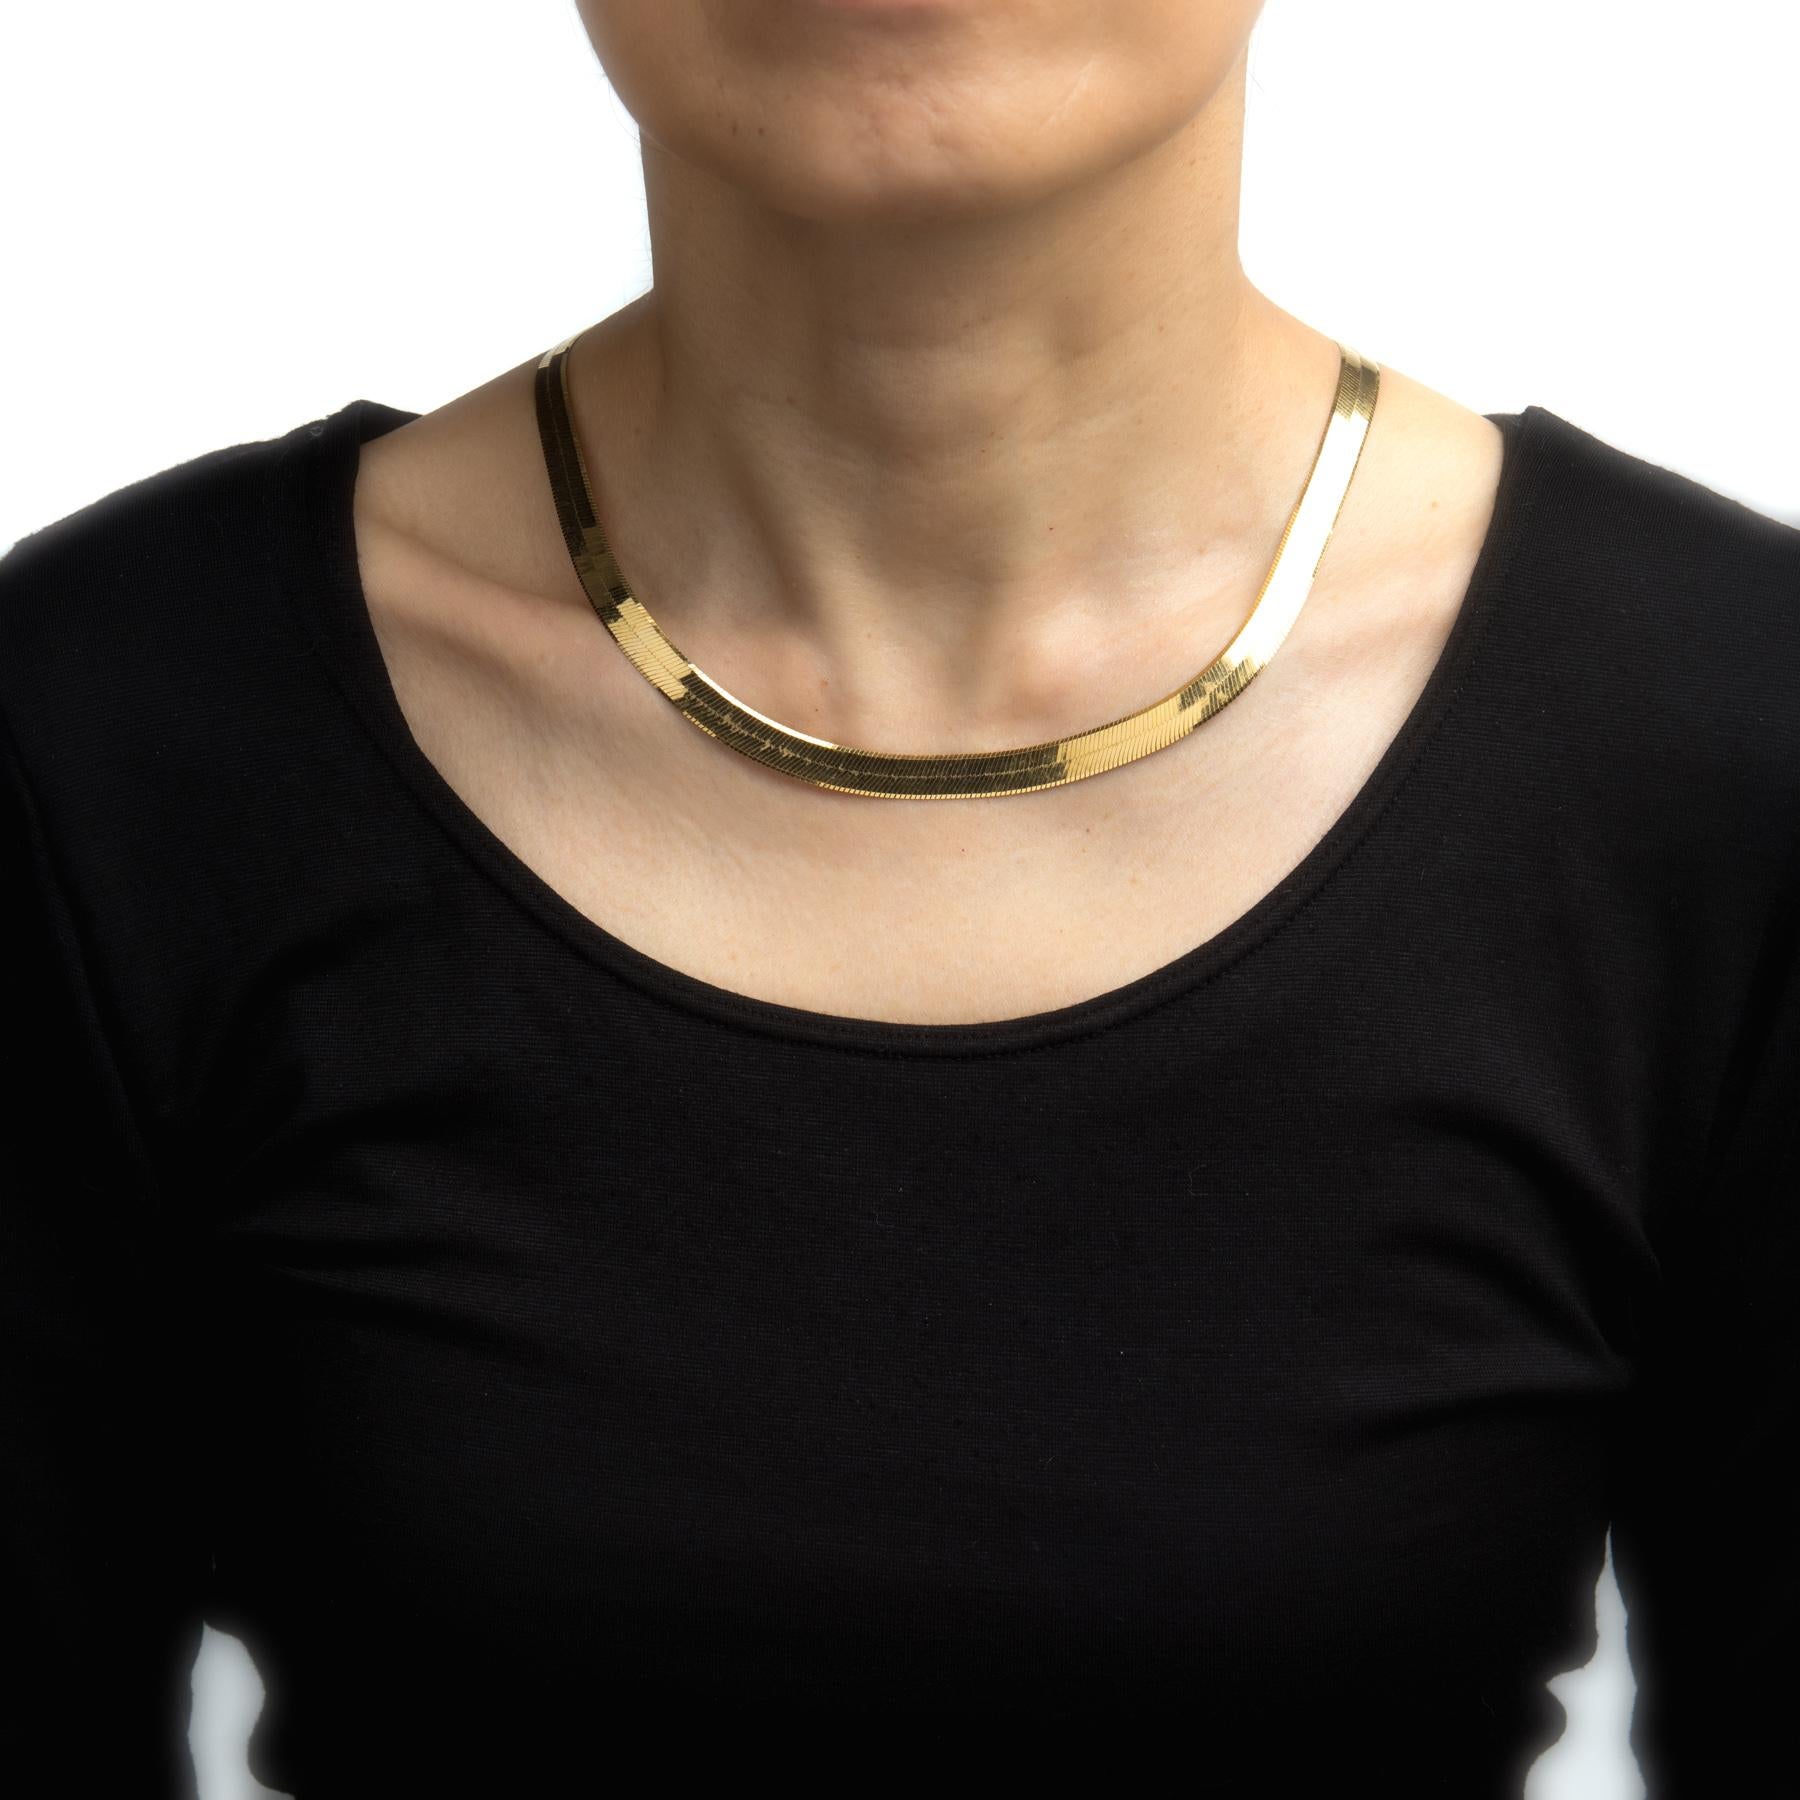 Elegant and finely detailed 14 karat yellow gold herringbone necklace.  

The necklace measures 18 inches in length and sits nicely just below the nape of the neck. The necklace measures 8mm wide. The necklace is great worn alone or layered with